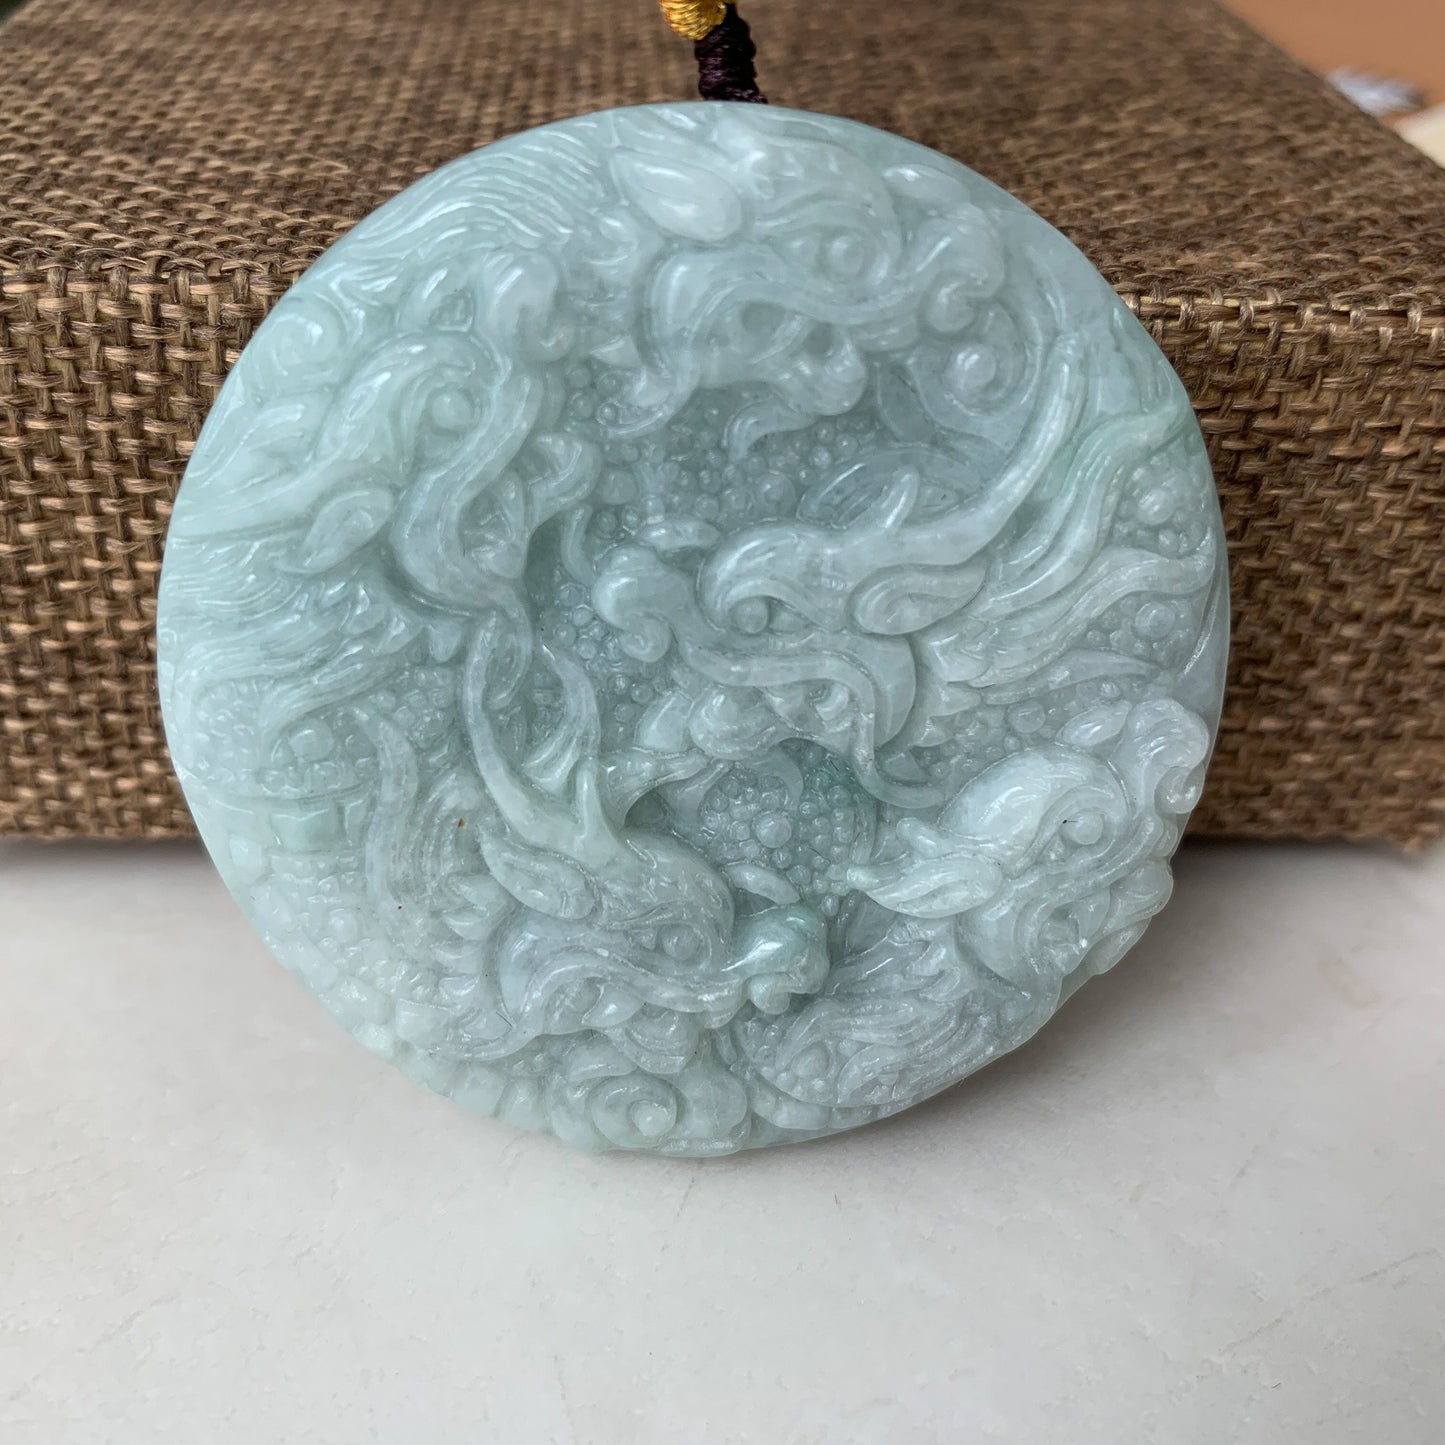 9 Dragon Jadeite Jade Chinese Zodiac Hand Carved Pendant Necklace, YJ-0621-0007535 - AriaDesignCollection